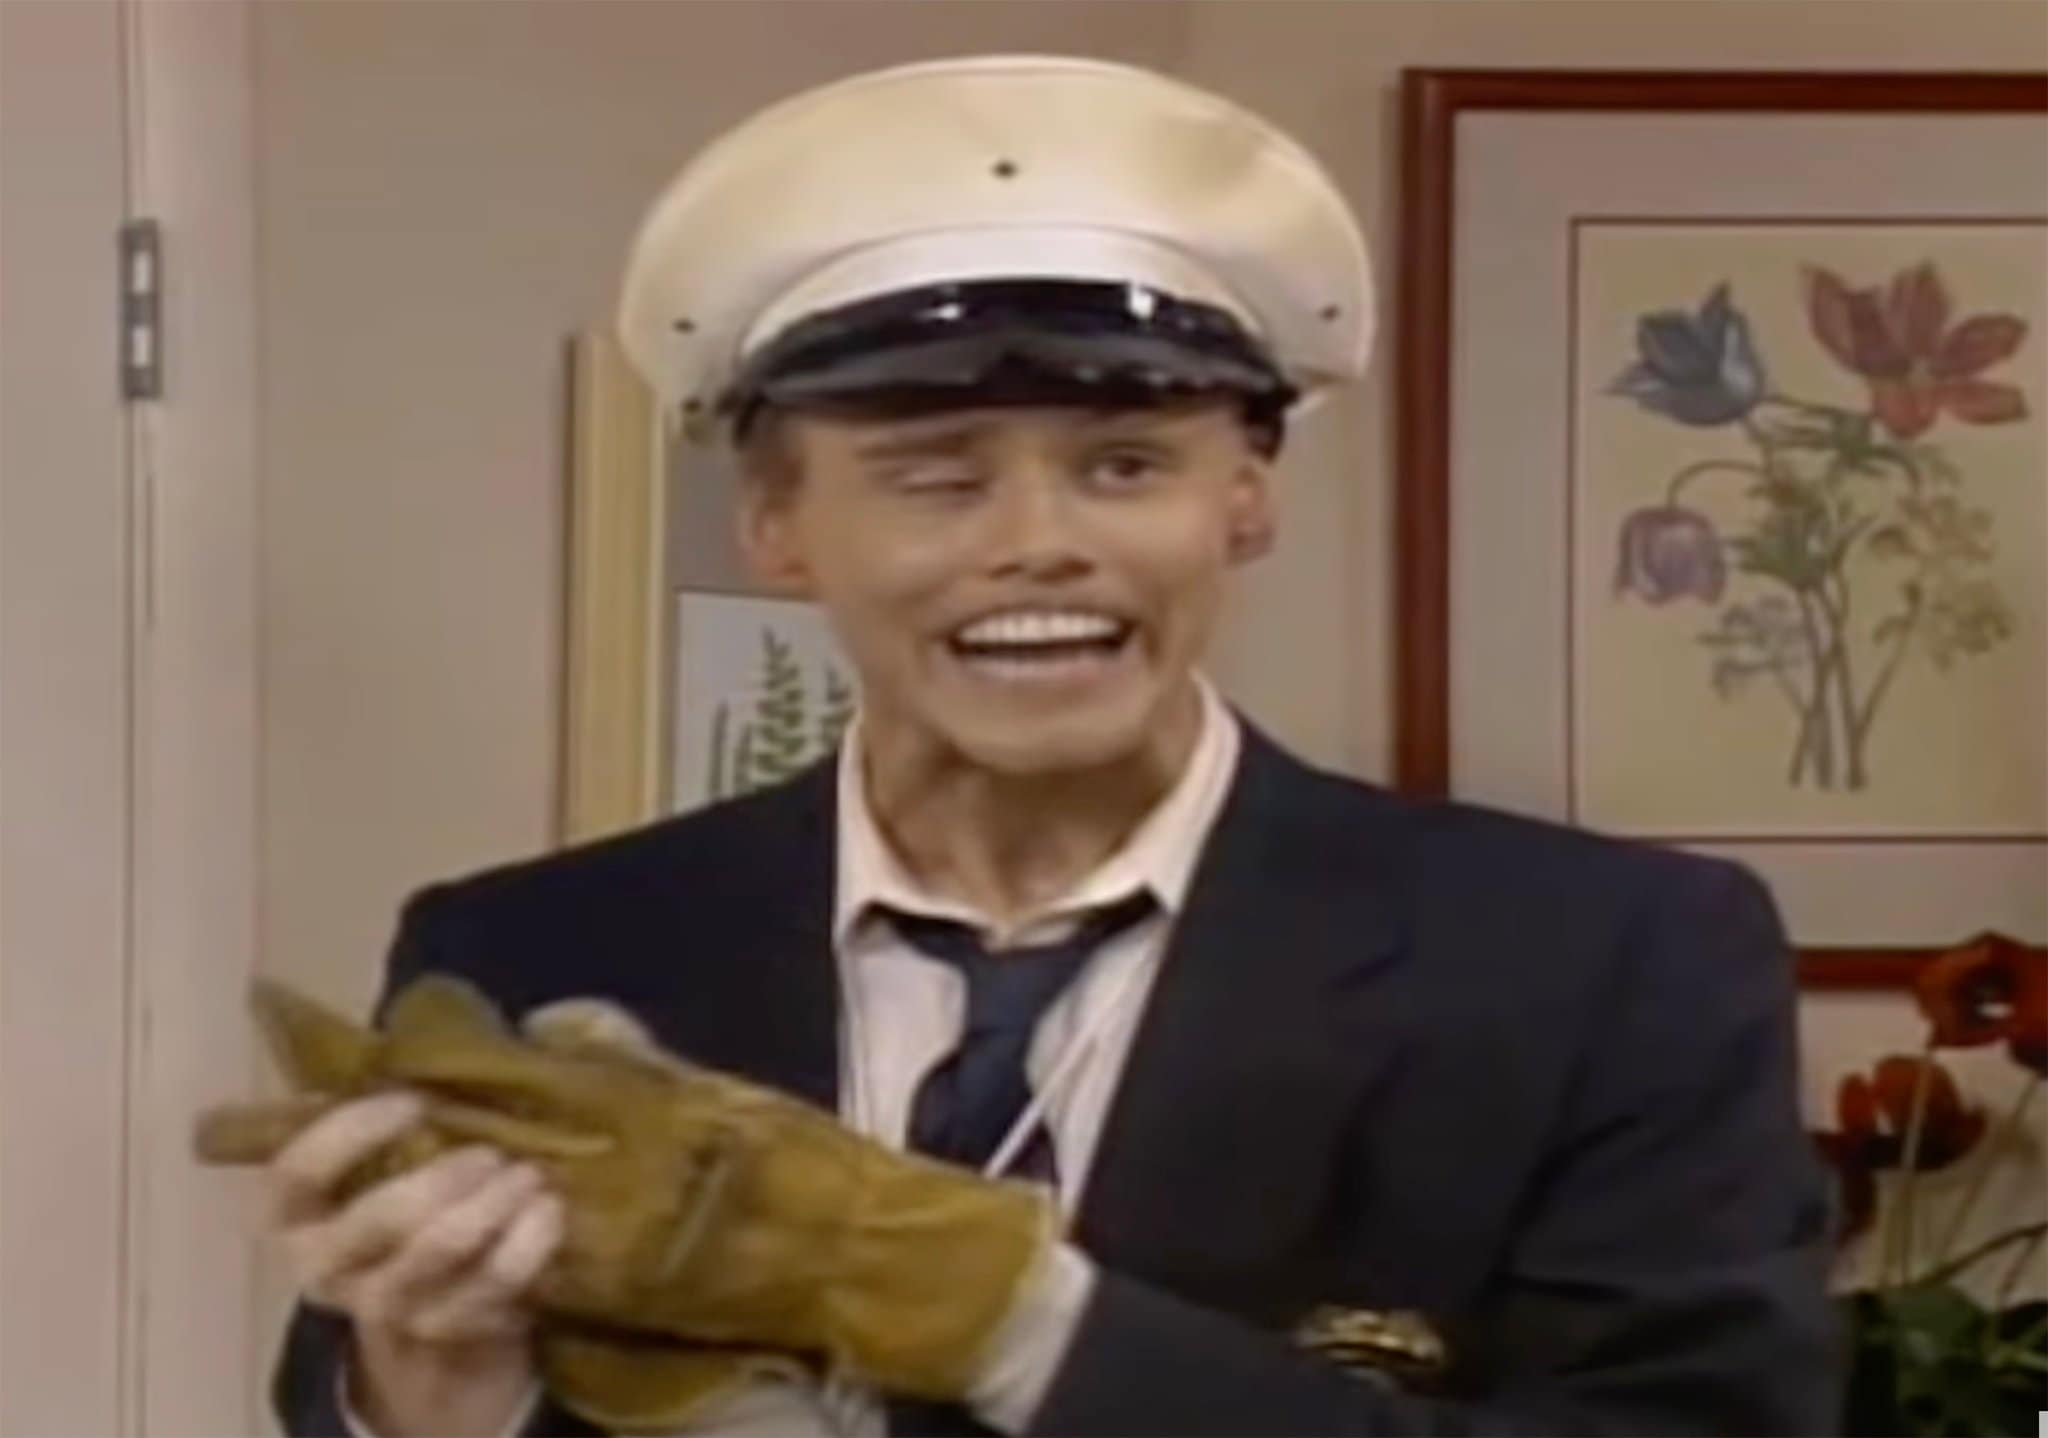 Jim Carrey's Fire Marshall Bill character is a minor antagonist in In Living Color